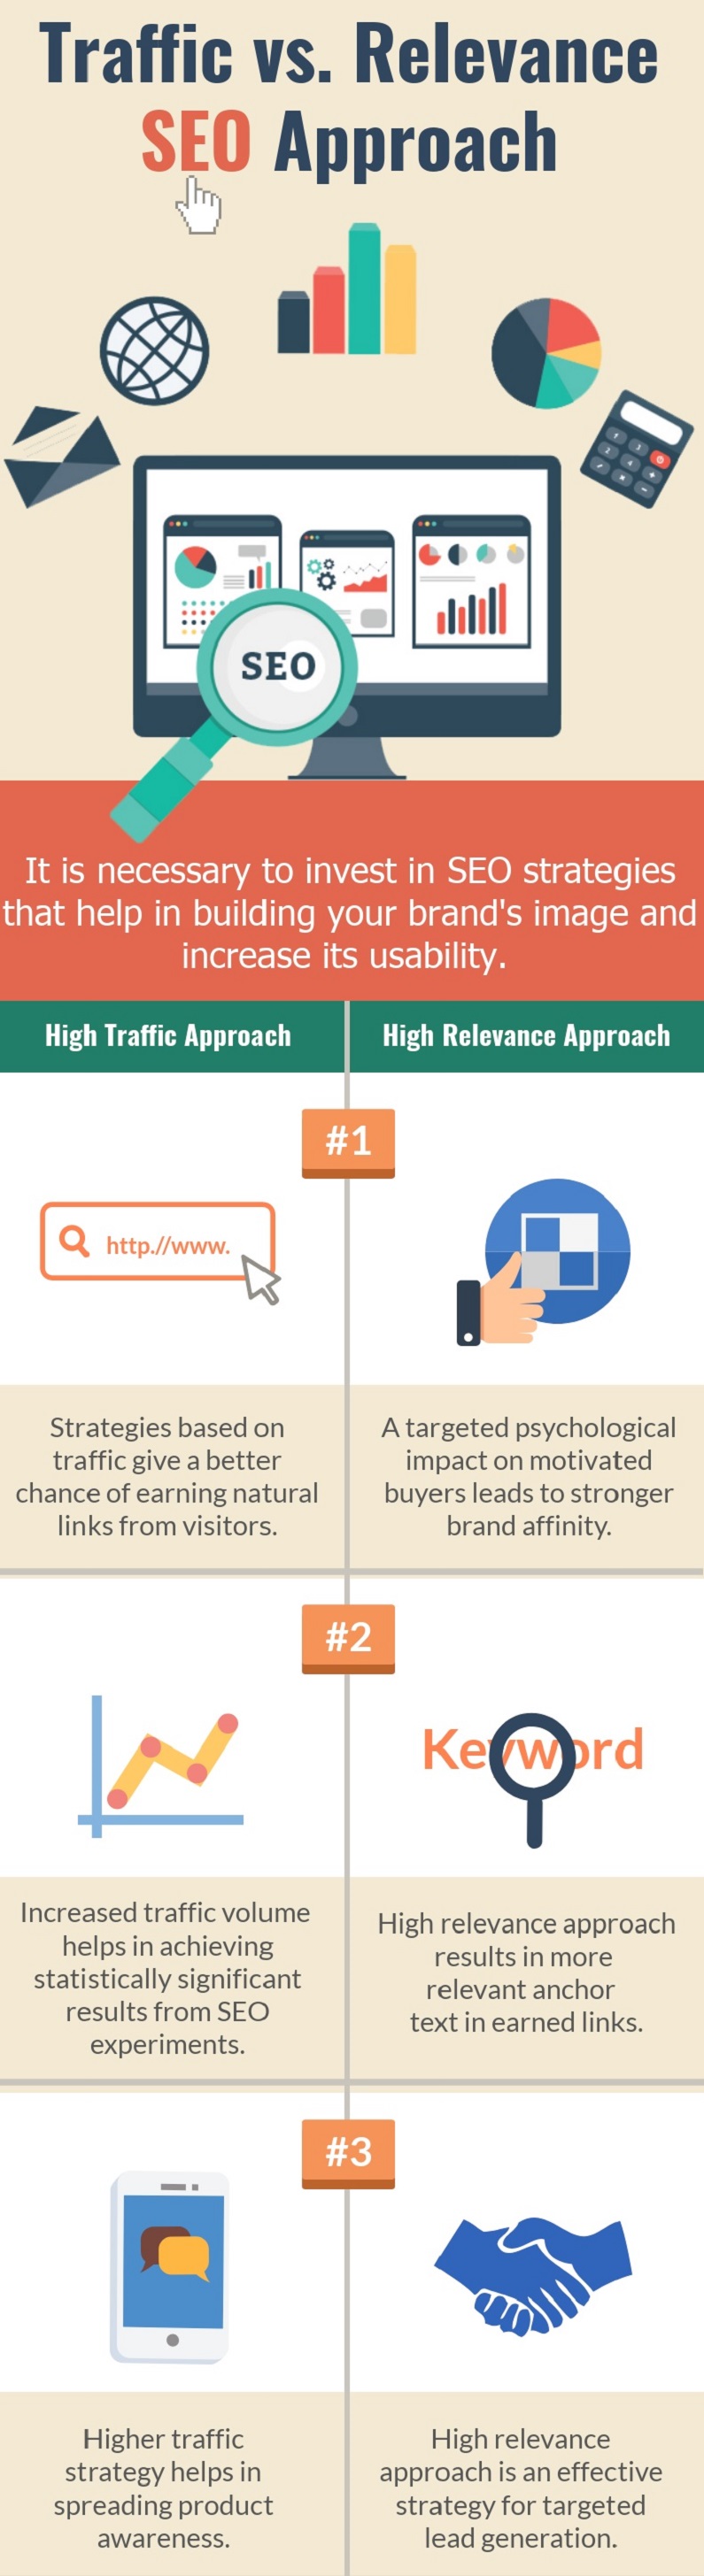 Traffic-vs-Relevance-SEO-Approach